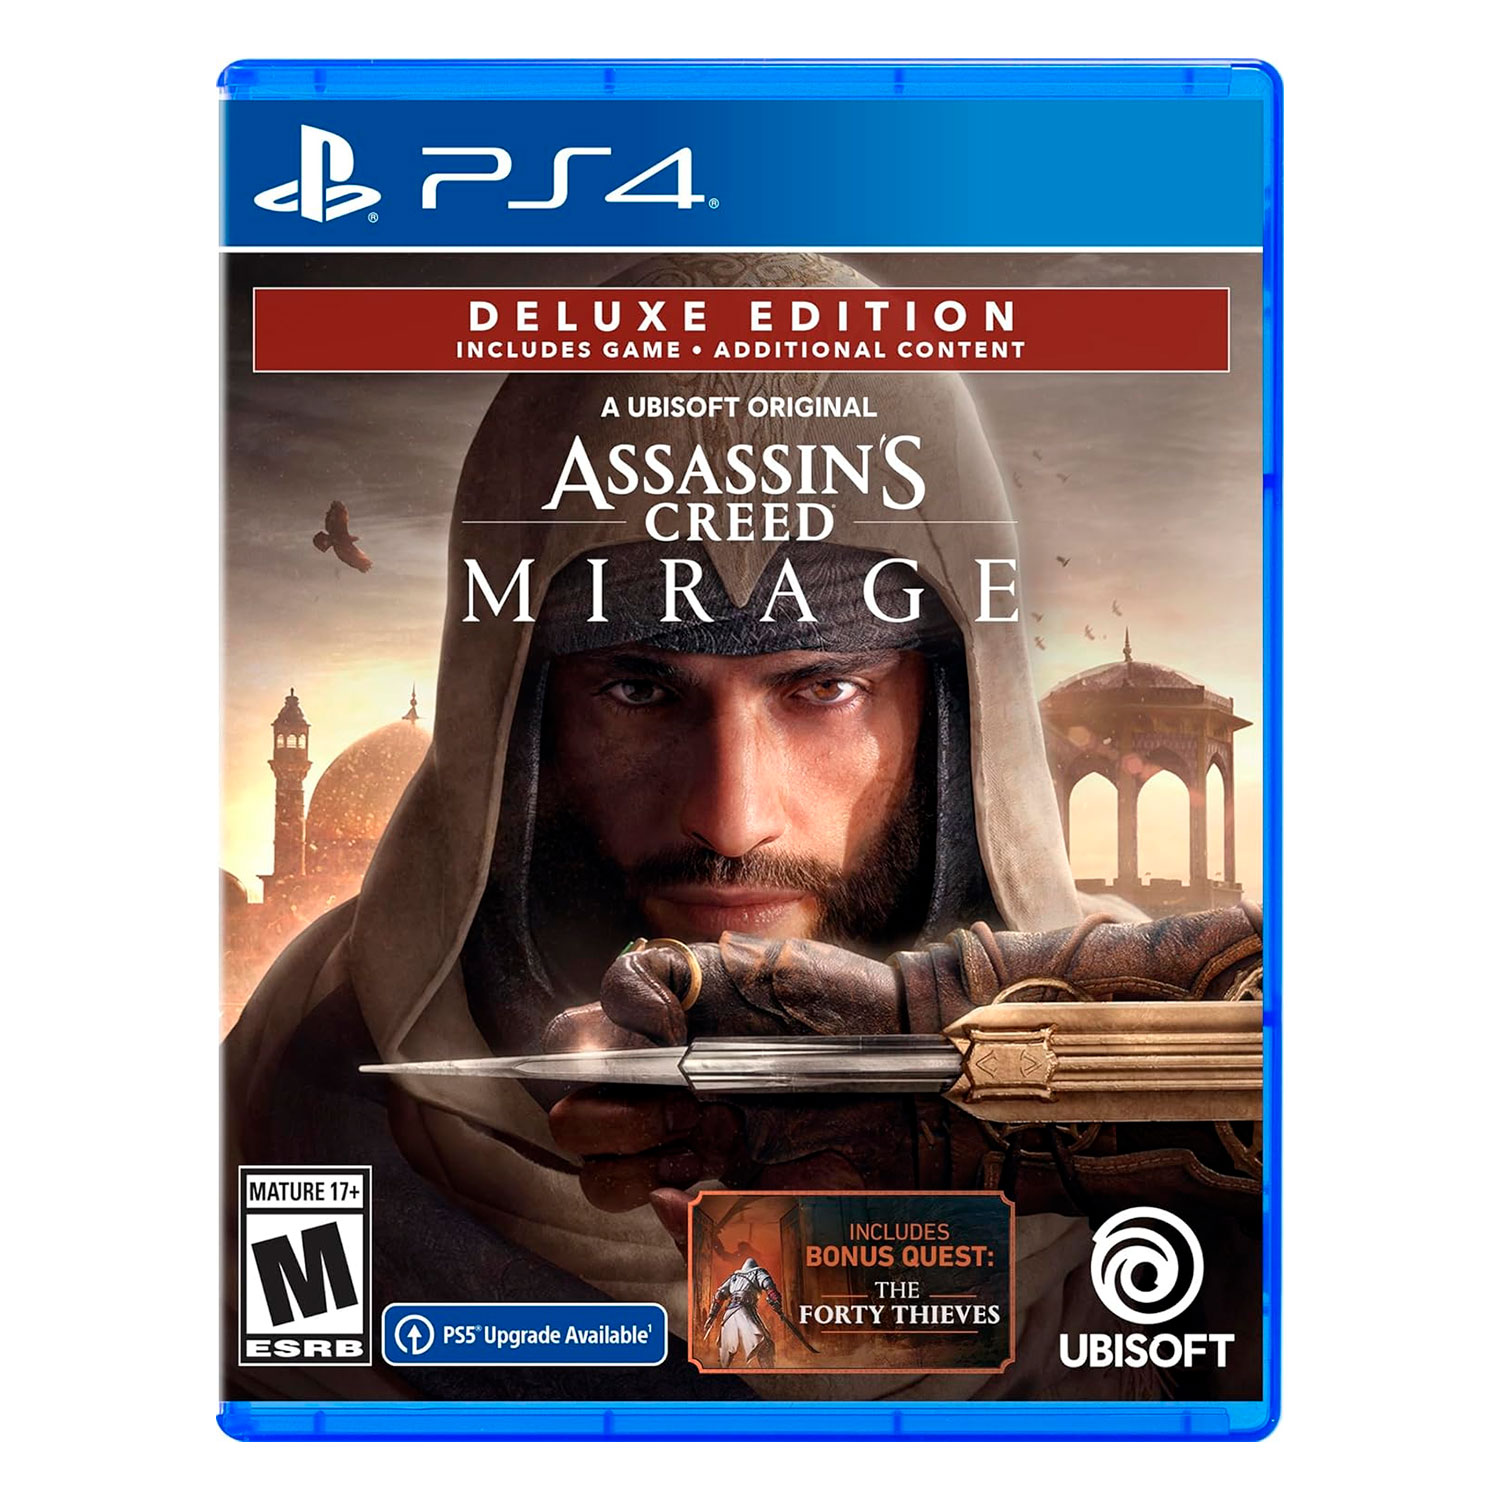 Jogo Assassin's Creed Mirage Deluxe Edition para PS4